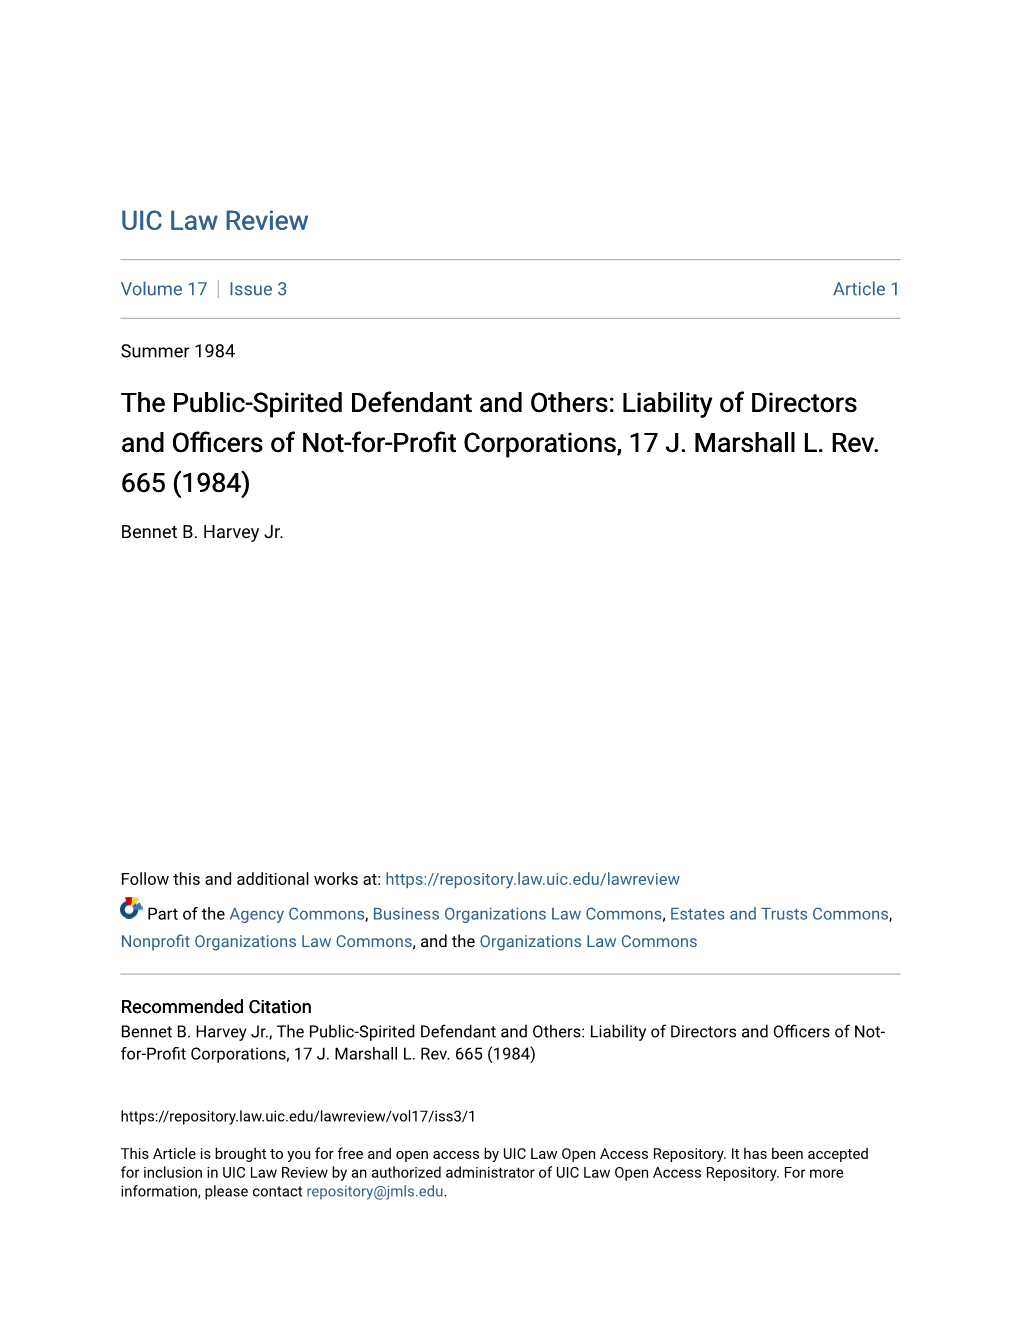 The Public-Spirited Defendant and Others: Liability of Directors and Officers of Not-For-Profit Corporations, 17 J. Marshall L. Rev